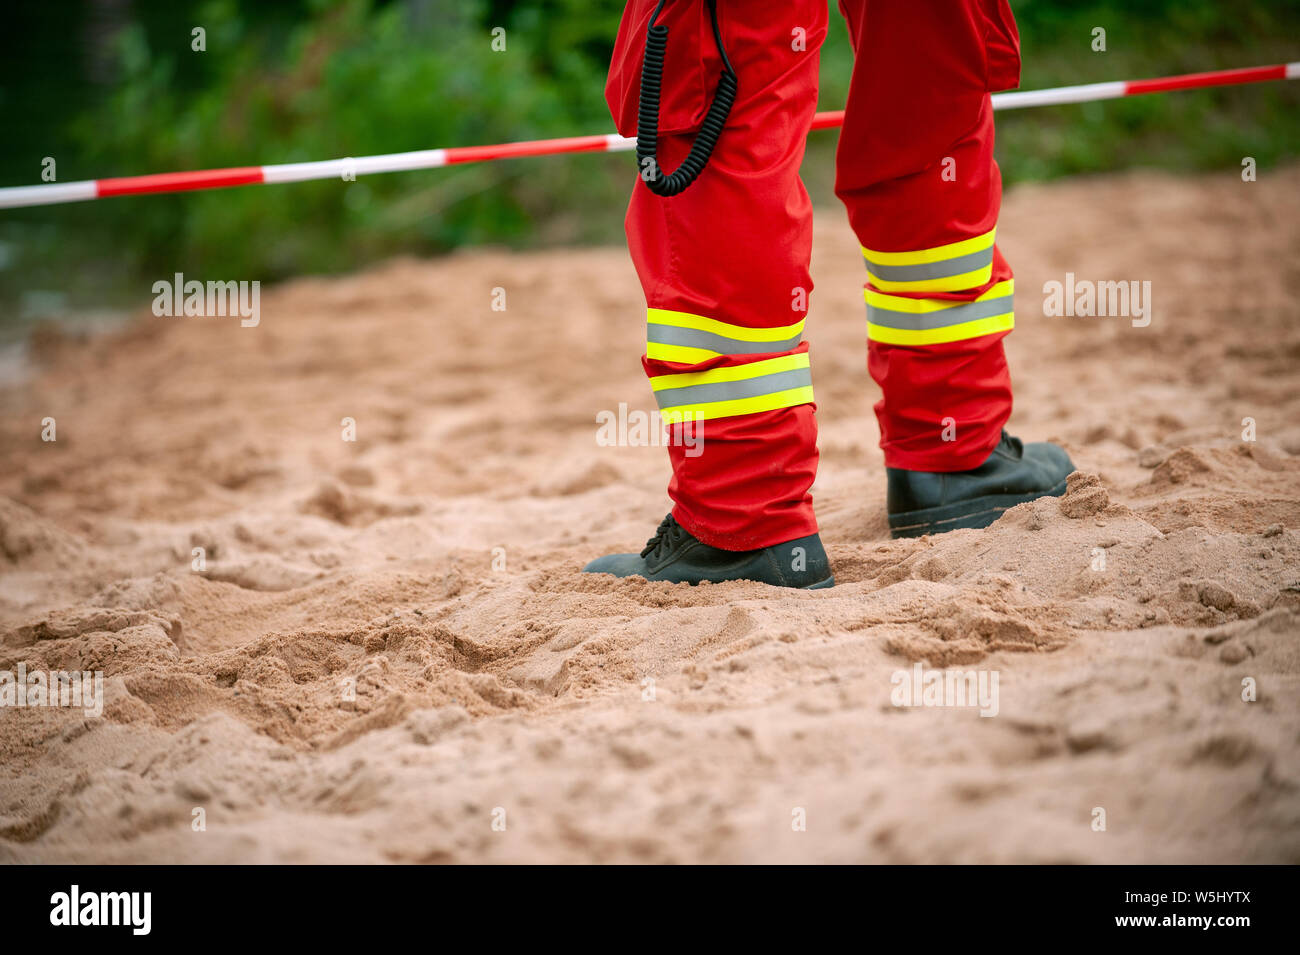 Legs of rescuer standind on the sand in front of red and white tape. Red trousers with reflective elements. Stock Photo